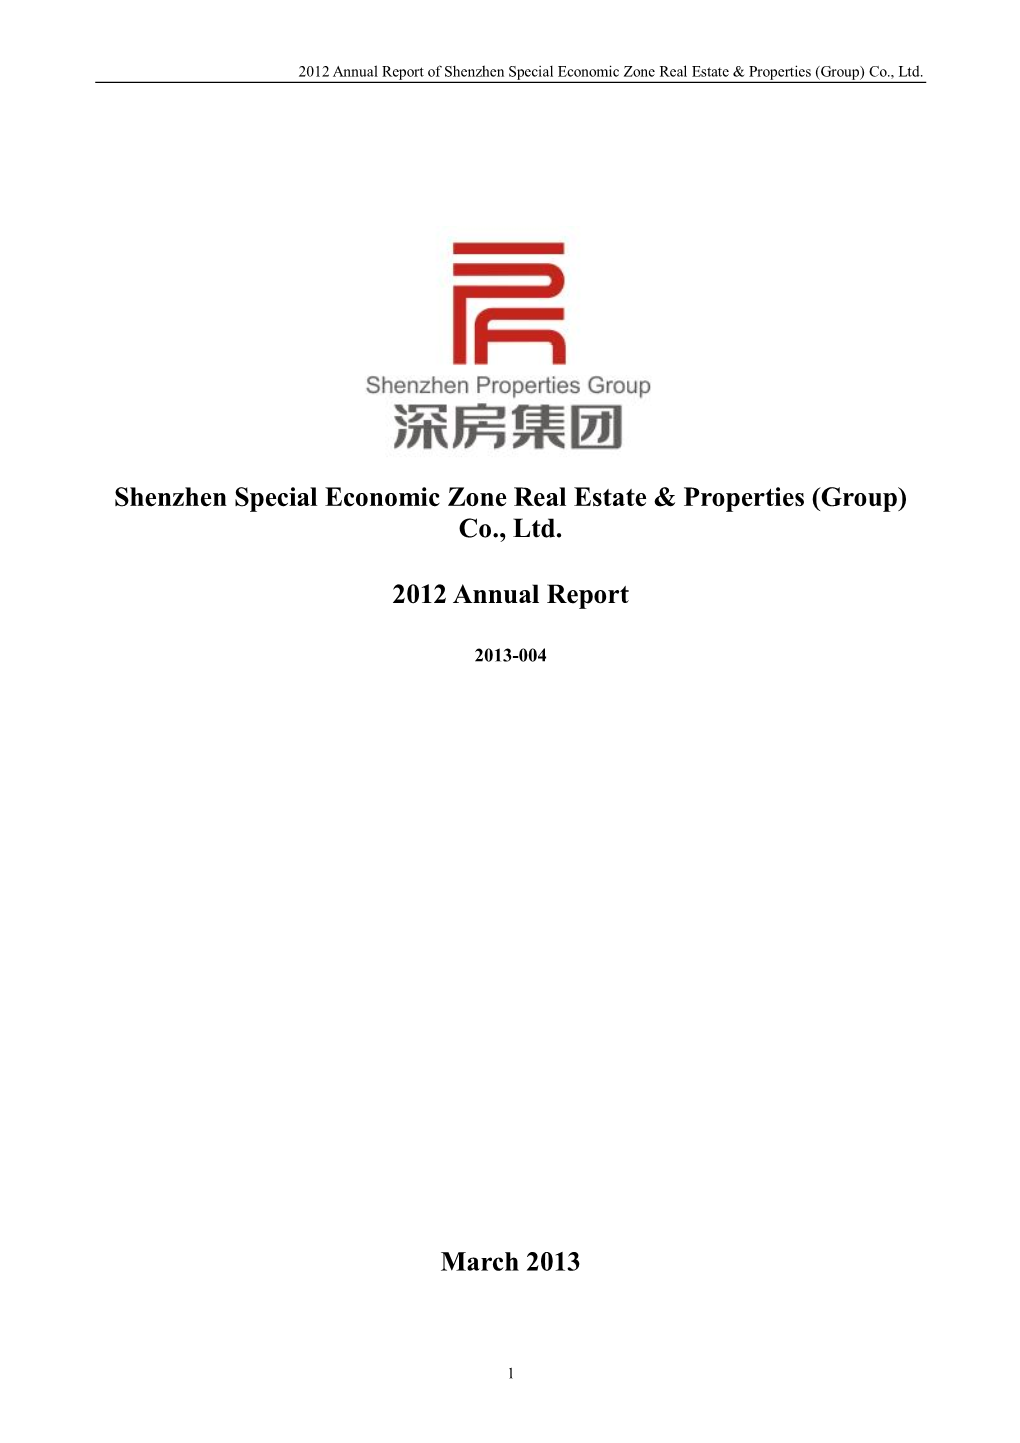 Shenzhen Special Economic Zone Real Estate & Properties (Group